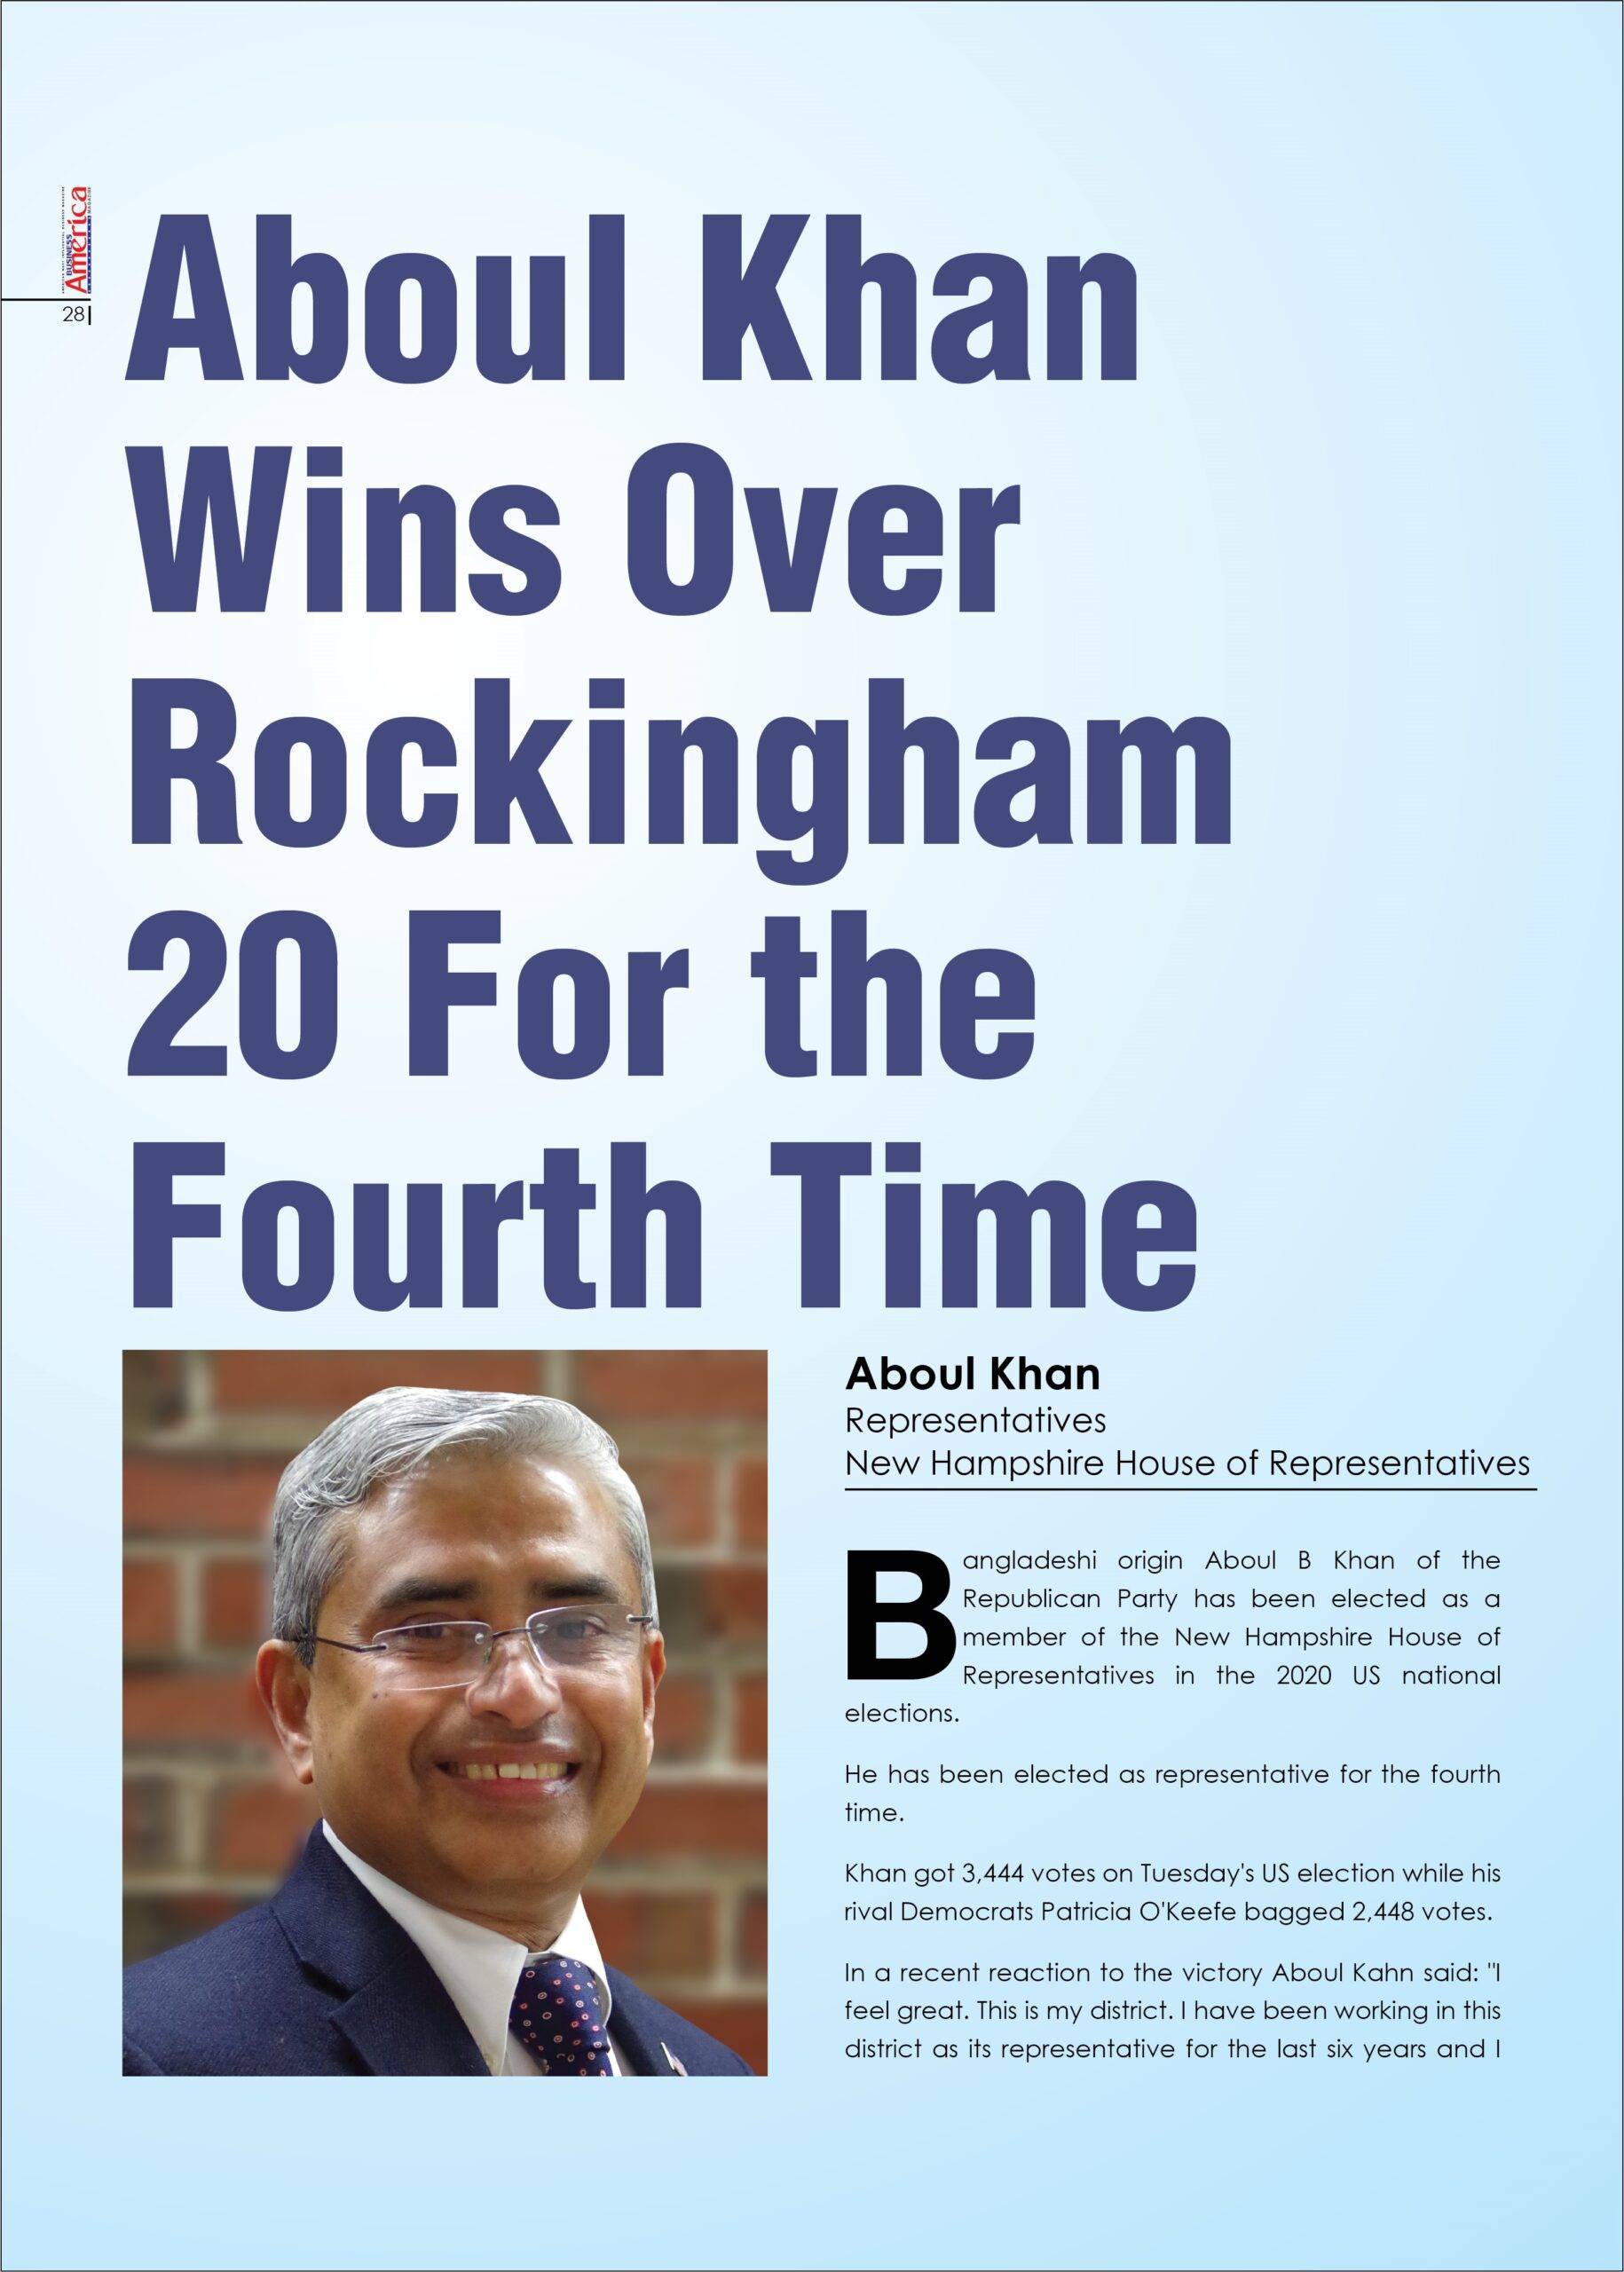 Abul B Khan wins over Rockingham 20 for the fourth time